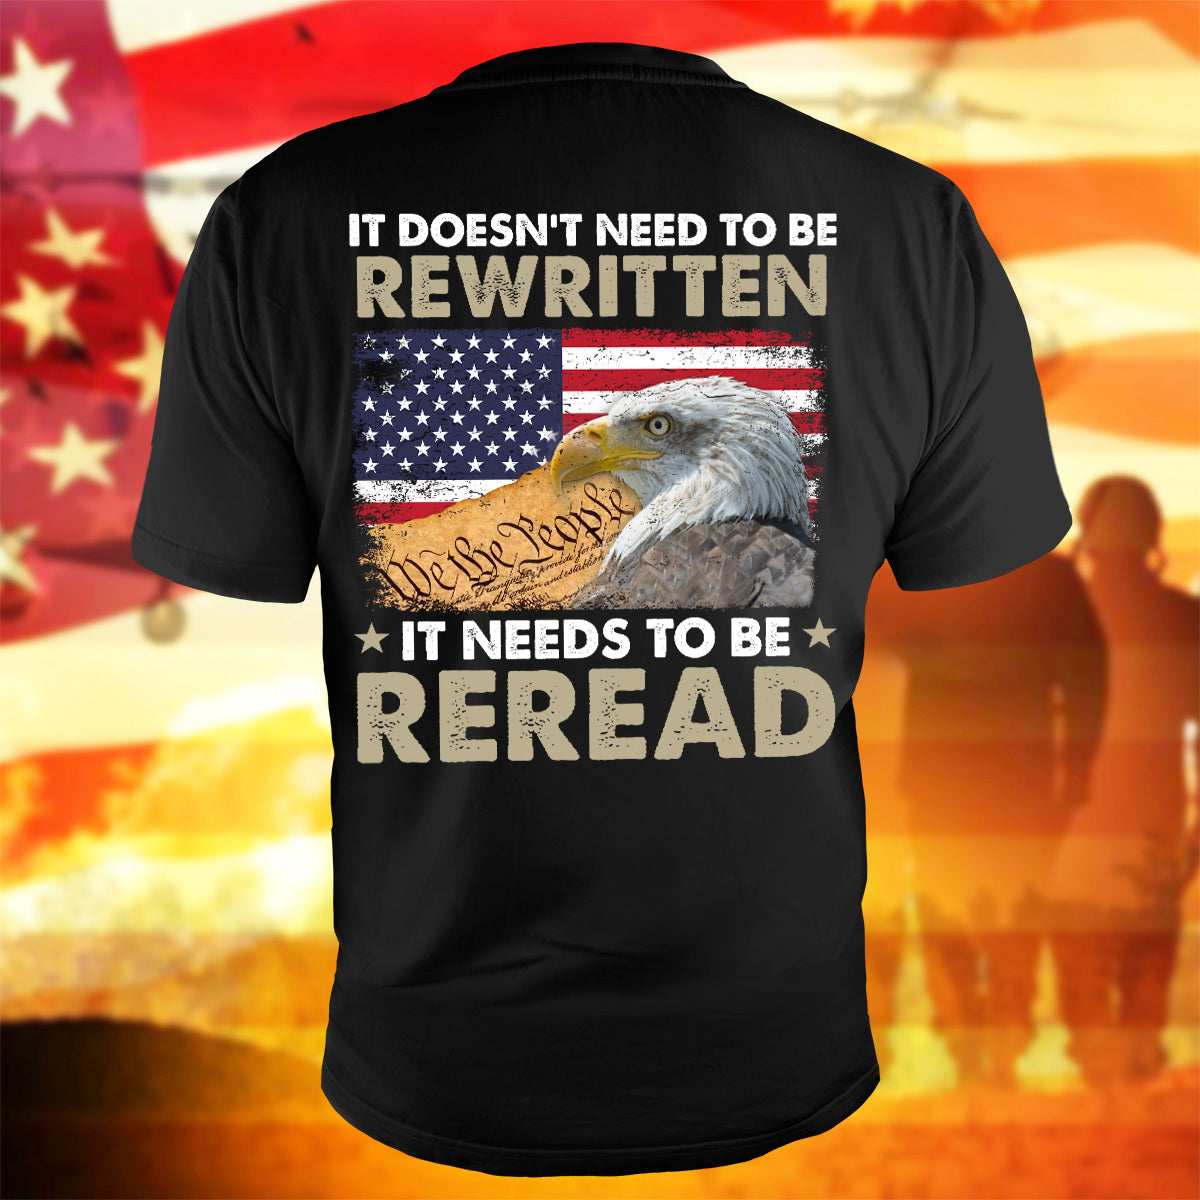 Eagle Liberty American Flag T-Shirts It Doesn't Need To Be Rewritten Shirt Patriotic Gift